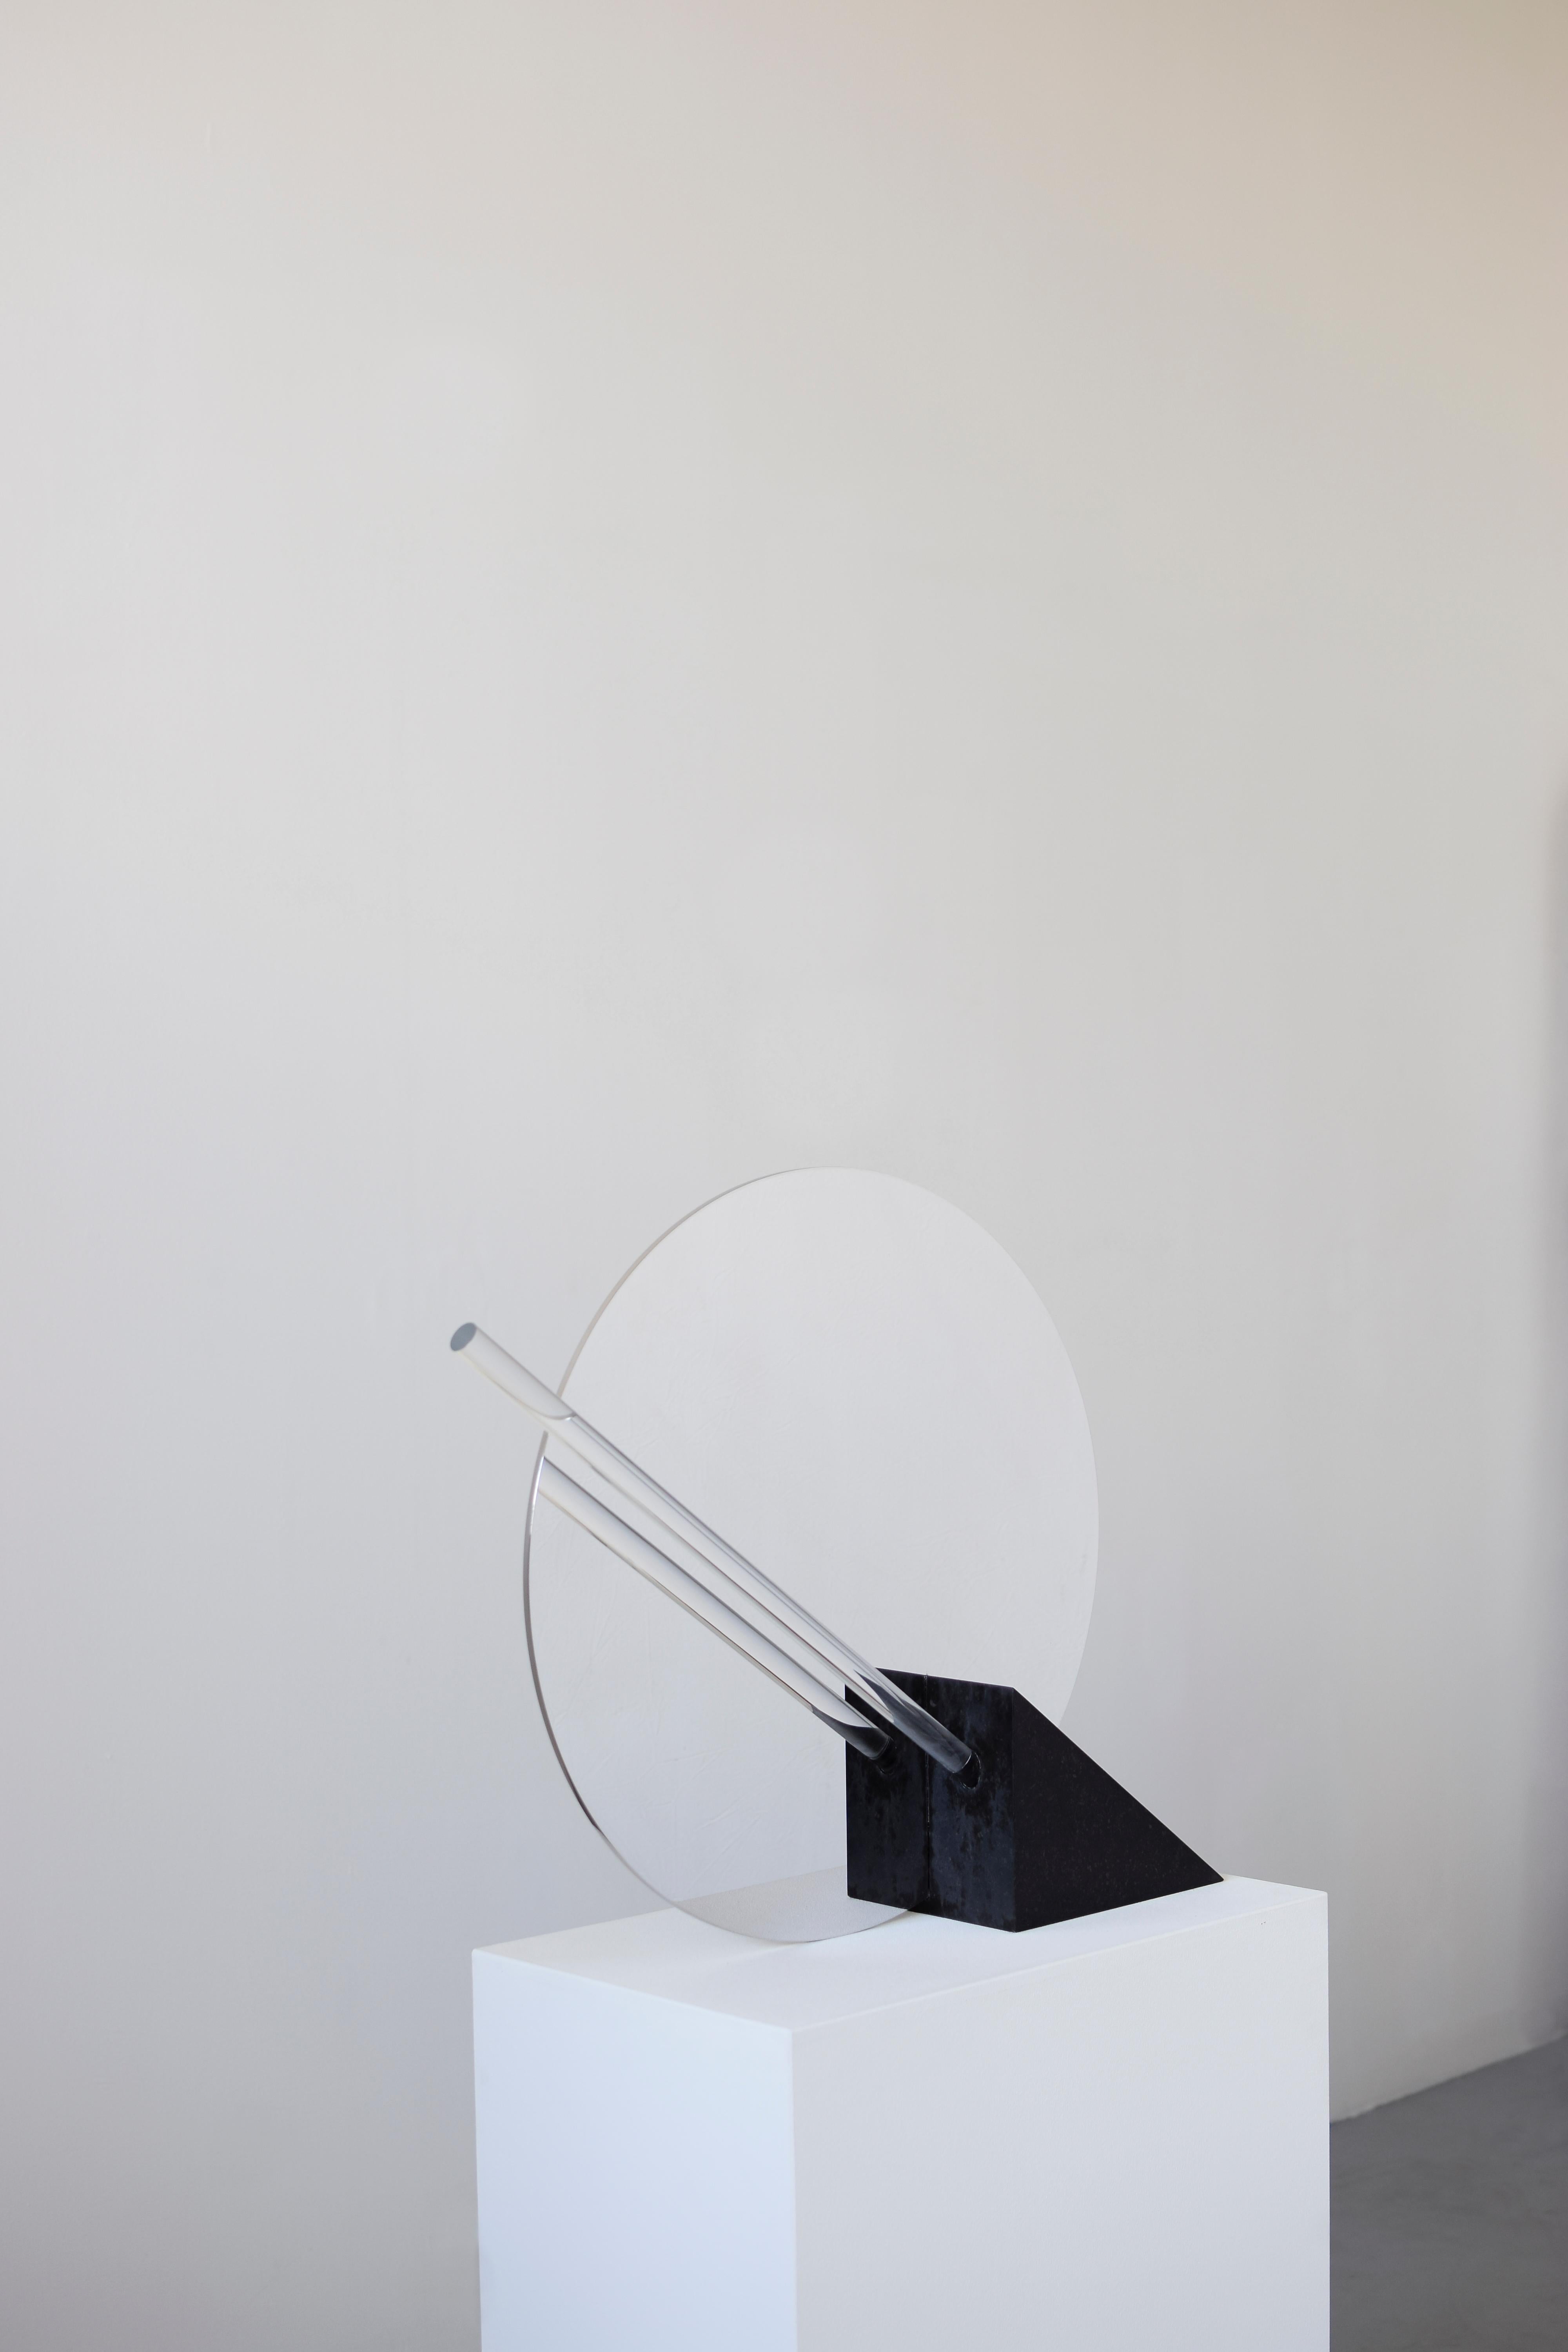 Sculptural enlightened table lamp, Maximilian Michaelis

Title: The elusive nature of perception, No. 03

Measures: ca. 14 x 50 x 27 cm

Material: polished stainless steel, Belgian bluestone, acrylic glas, Led

The basis and inspiration for